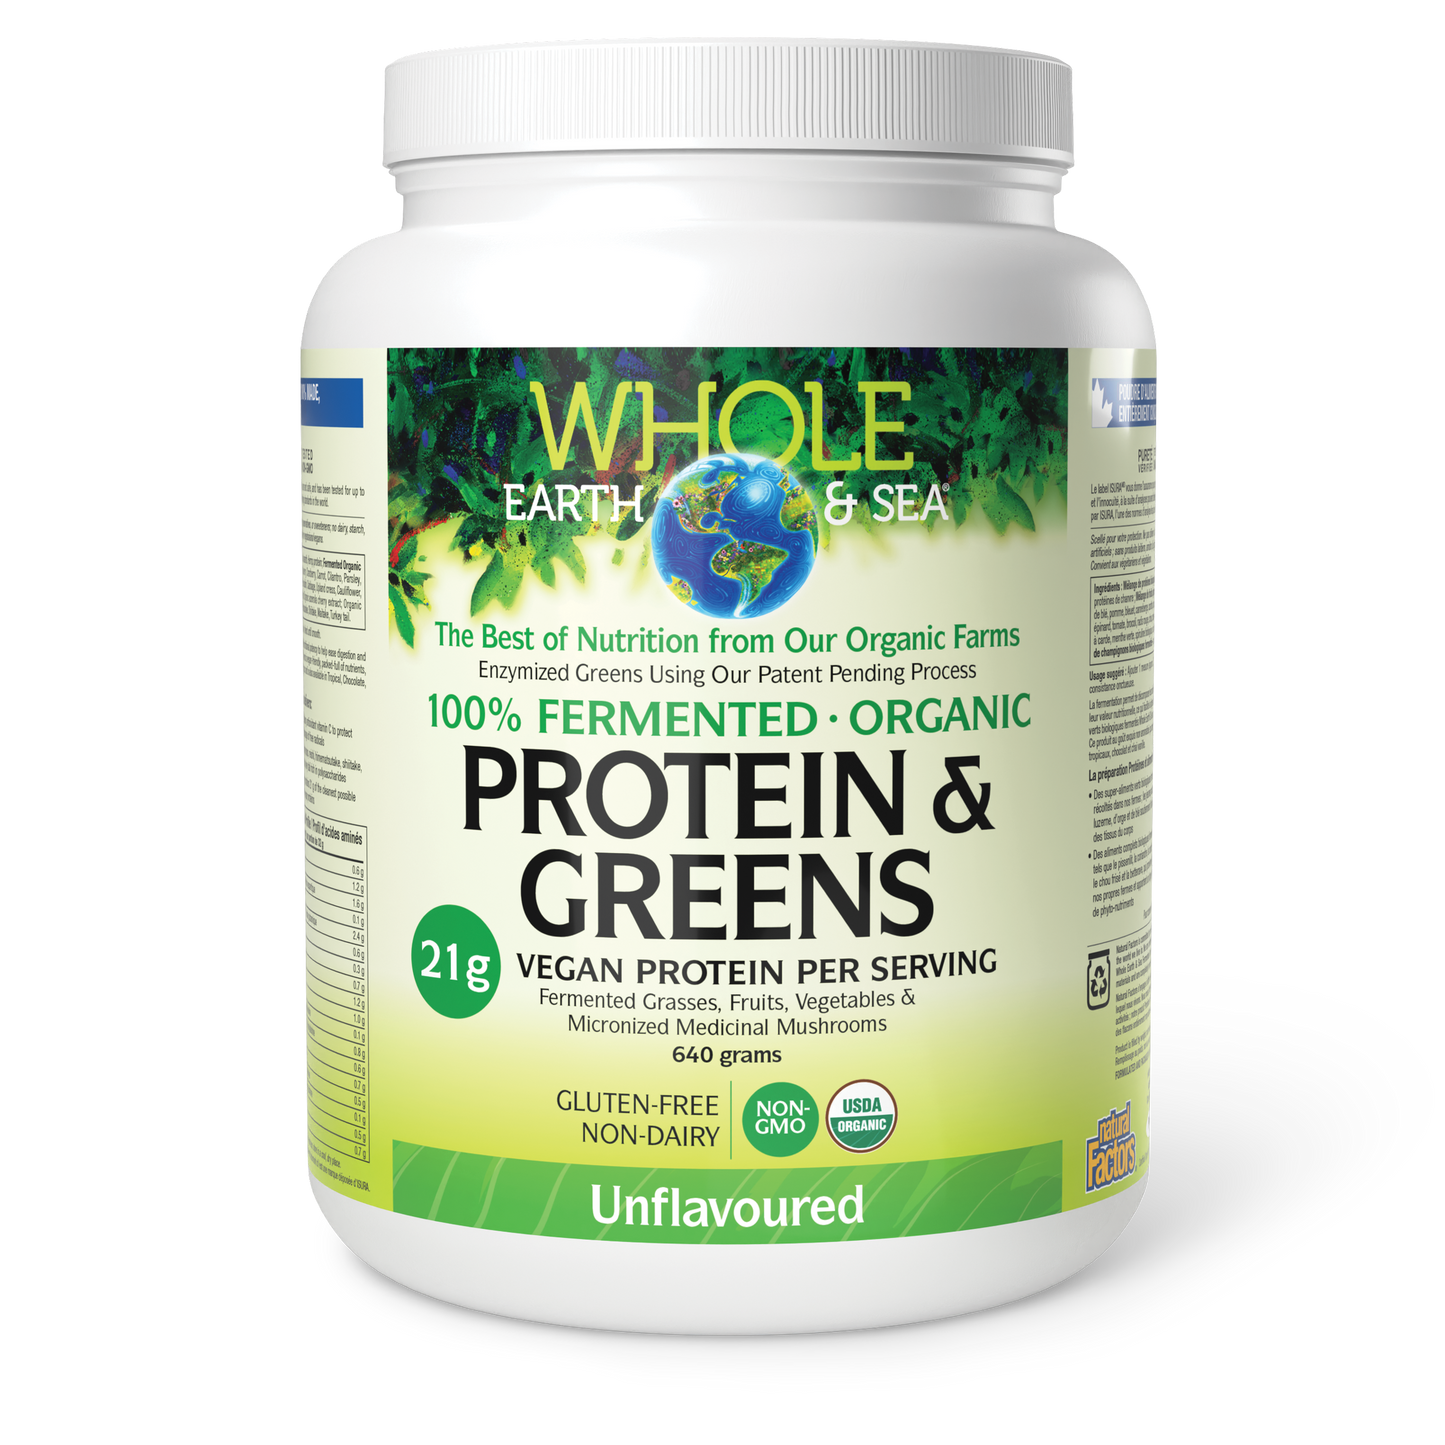 NATURAL FACTORS WES PROTEIN & GREENS UNFLAVOURED